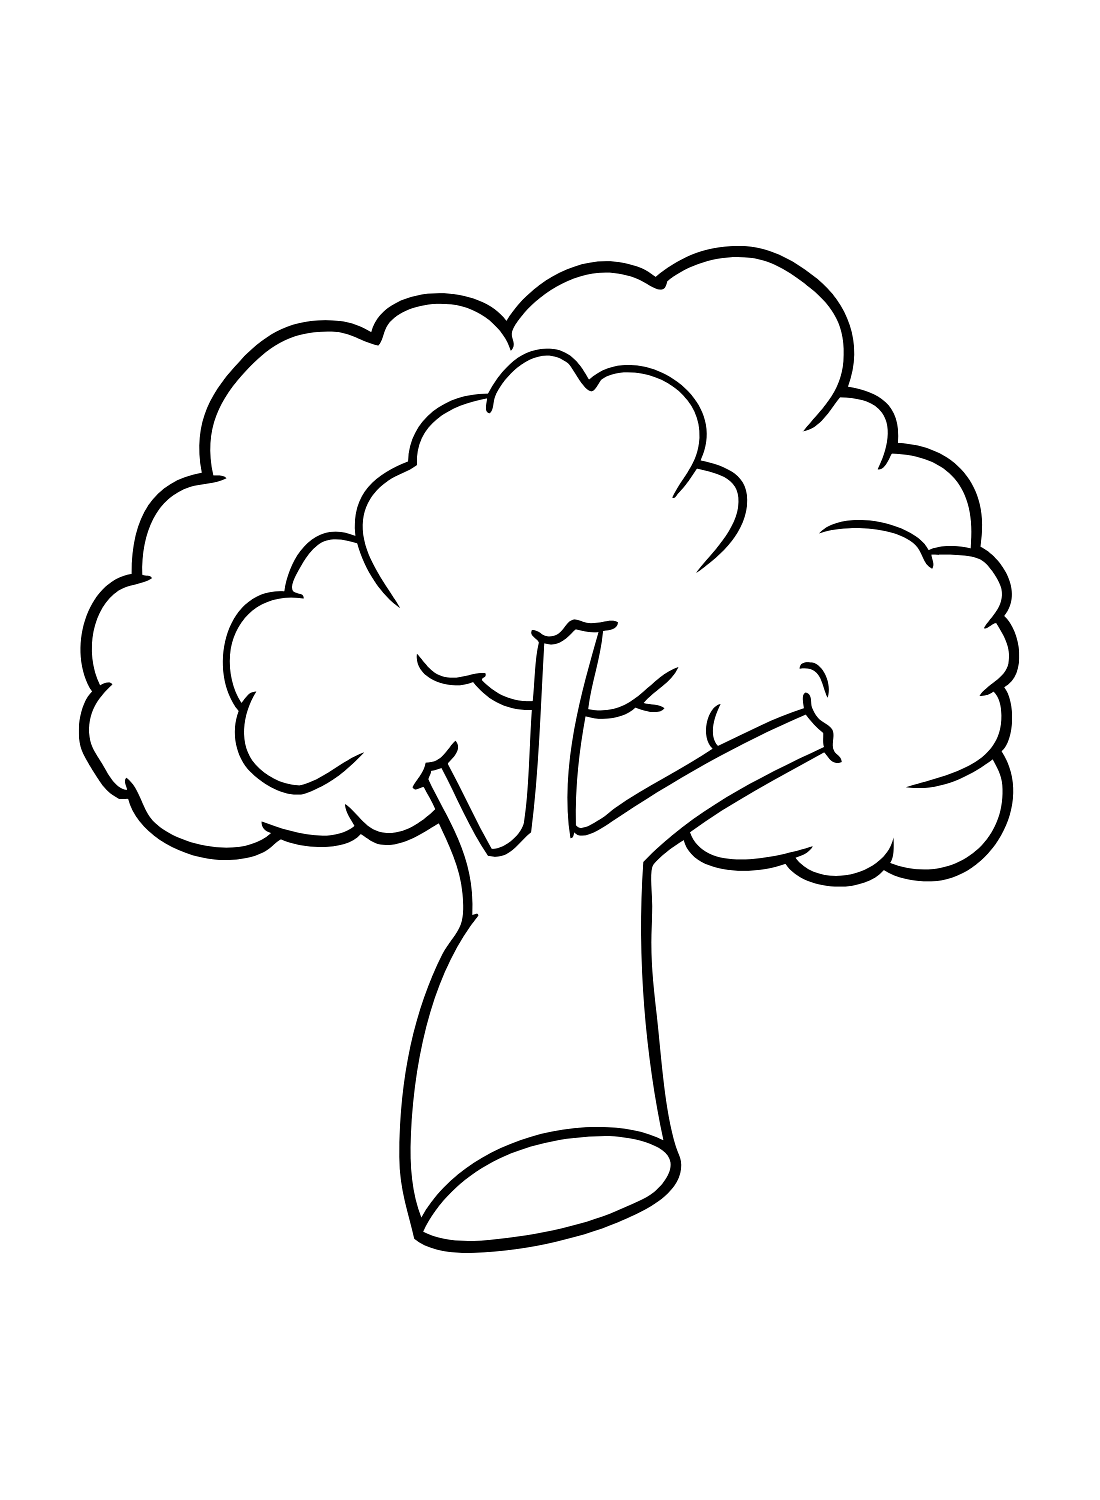 Broccoli Simple Coloring Pages